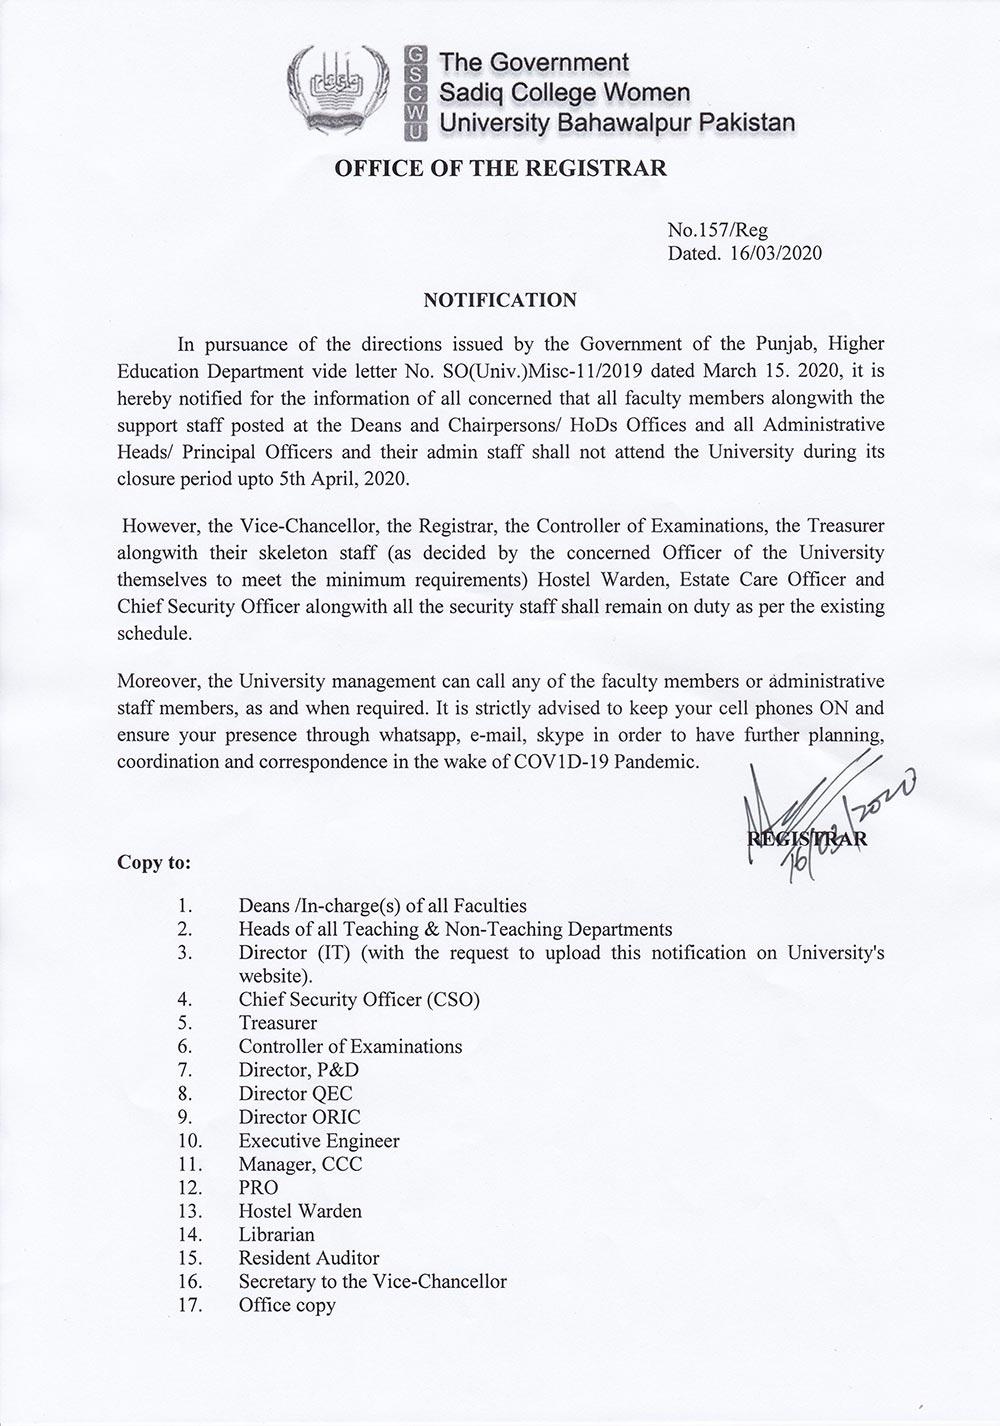 GSCWU Bahawalpur shall remain closed for all academic and research activities from March 14, 2020 till April 05, 2020